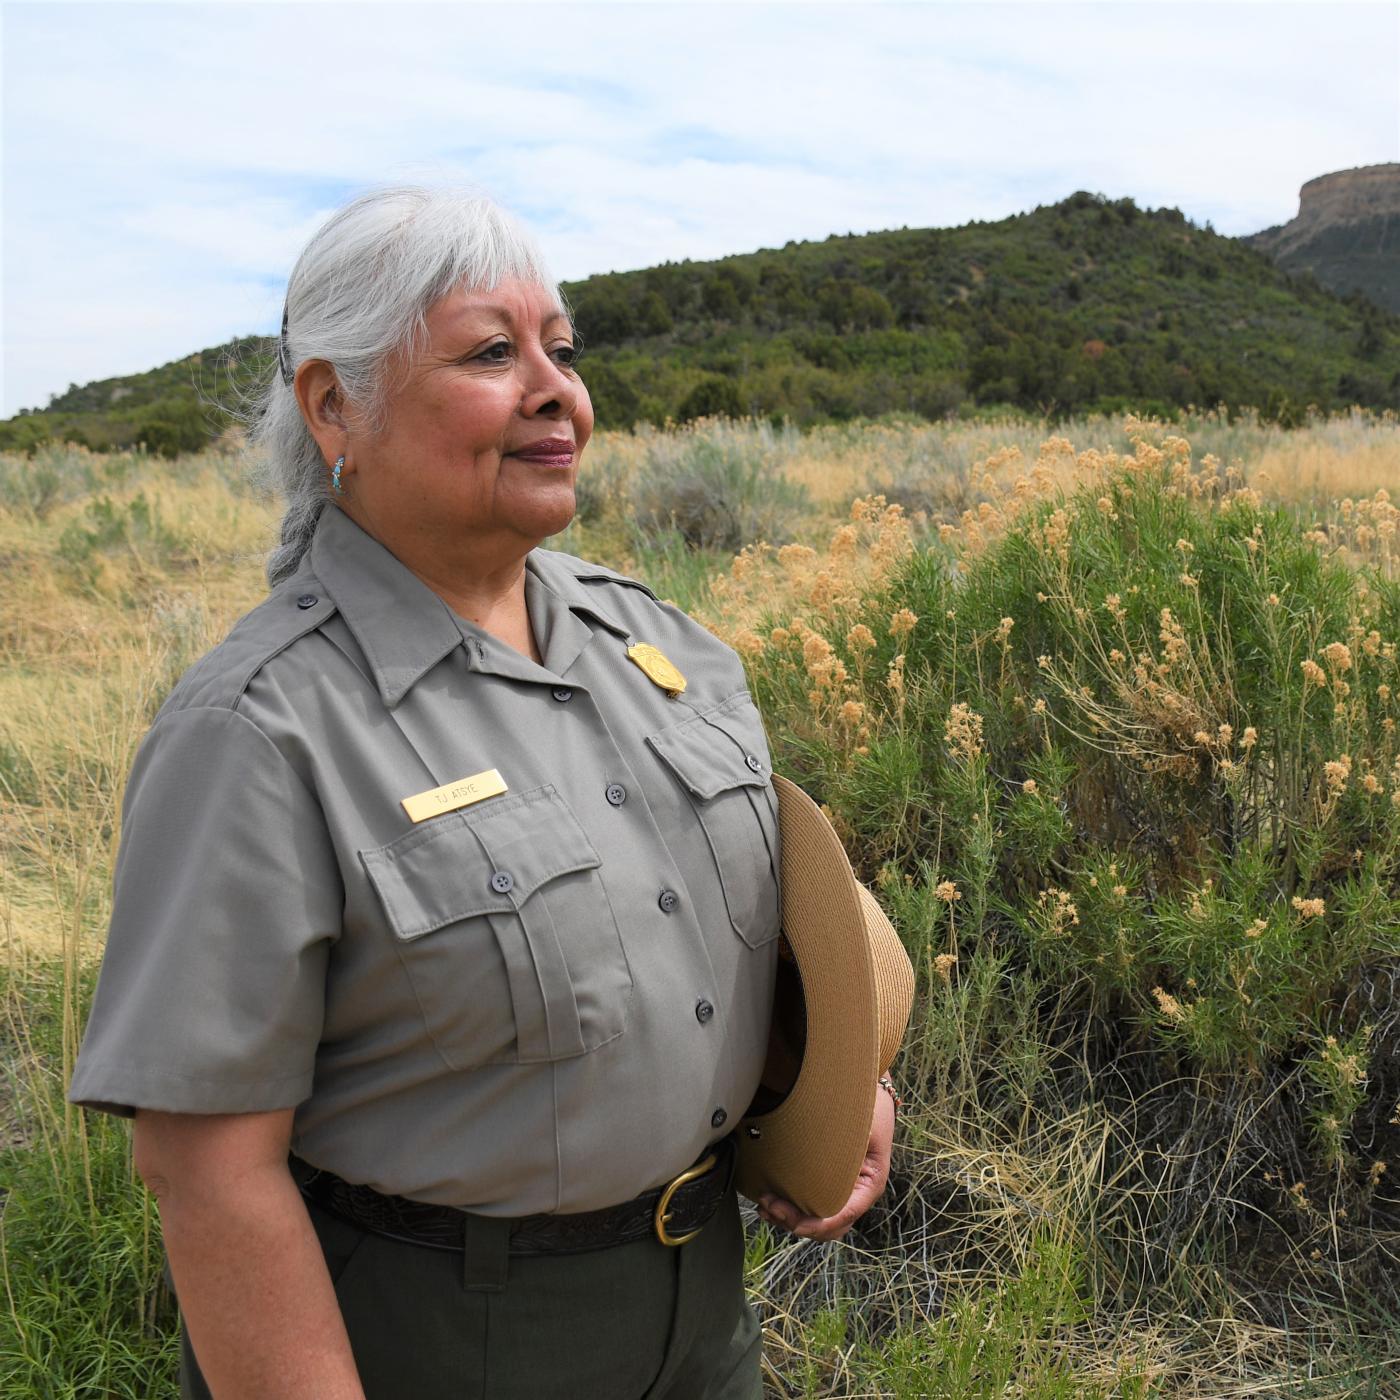 Woman in the NPS green and grey uniform, holding her flat hat at her side.